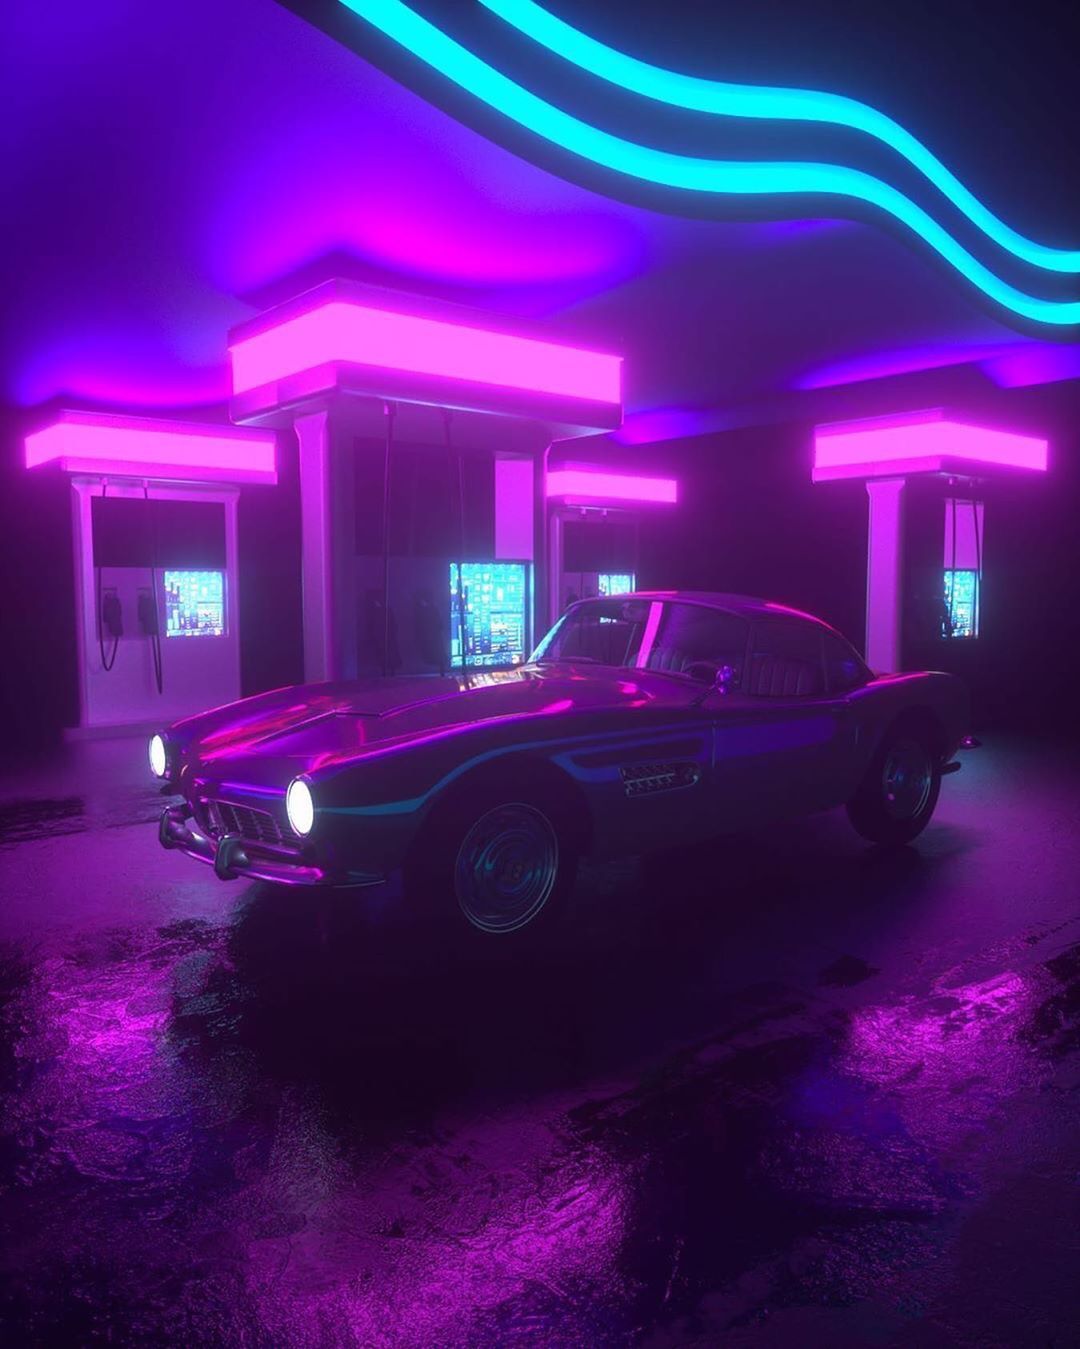 V A P O R W A V E on Instagram: “Also follow for more aesthetic and retro content/// GAS ST. Dark purple aesthetic, Neon aesthetic, Photo wall collage